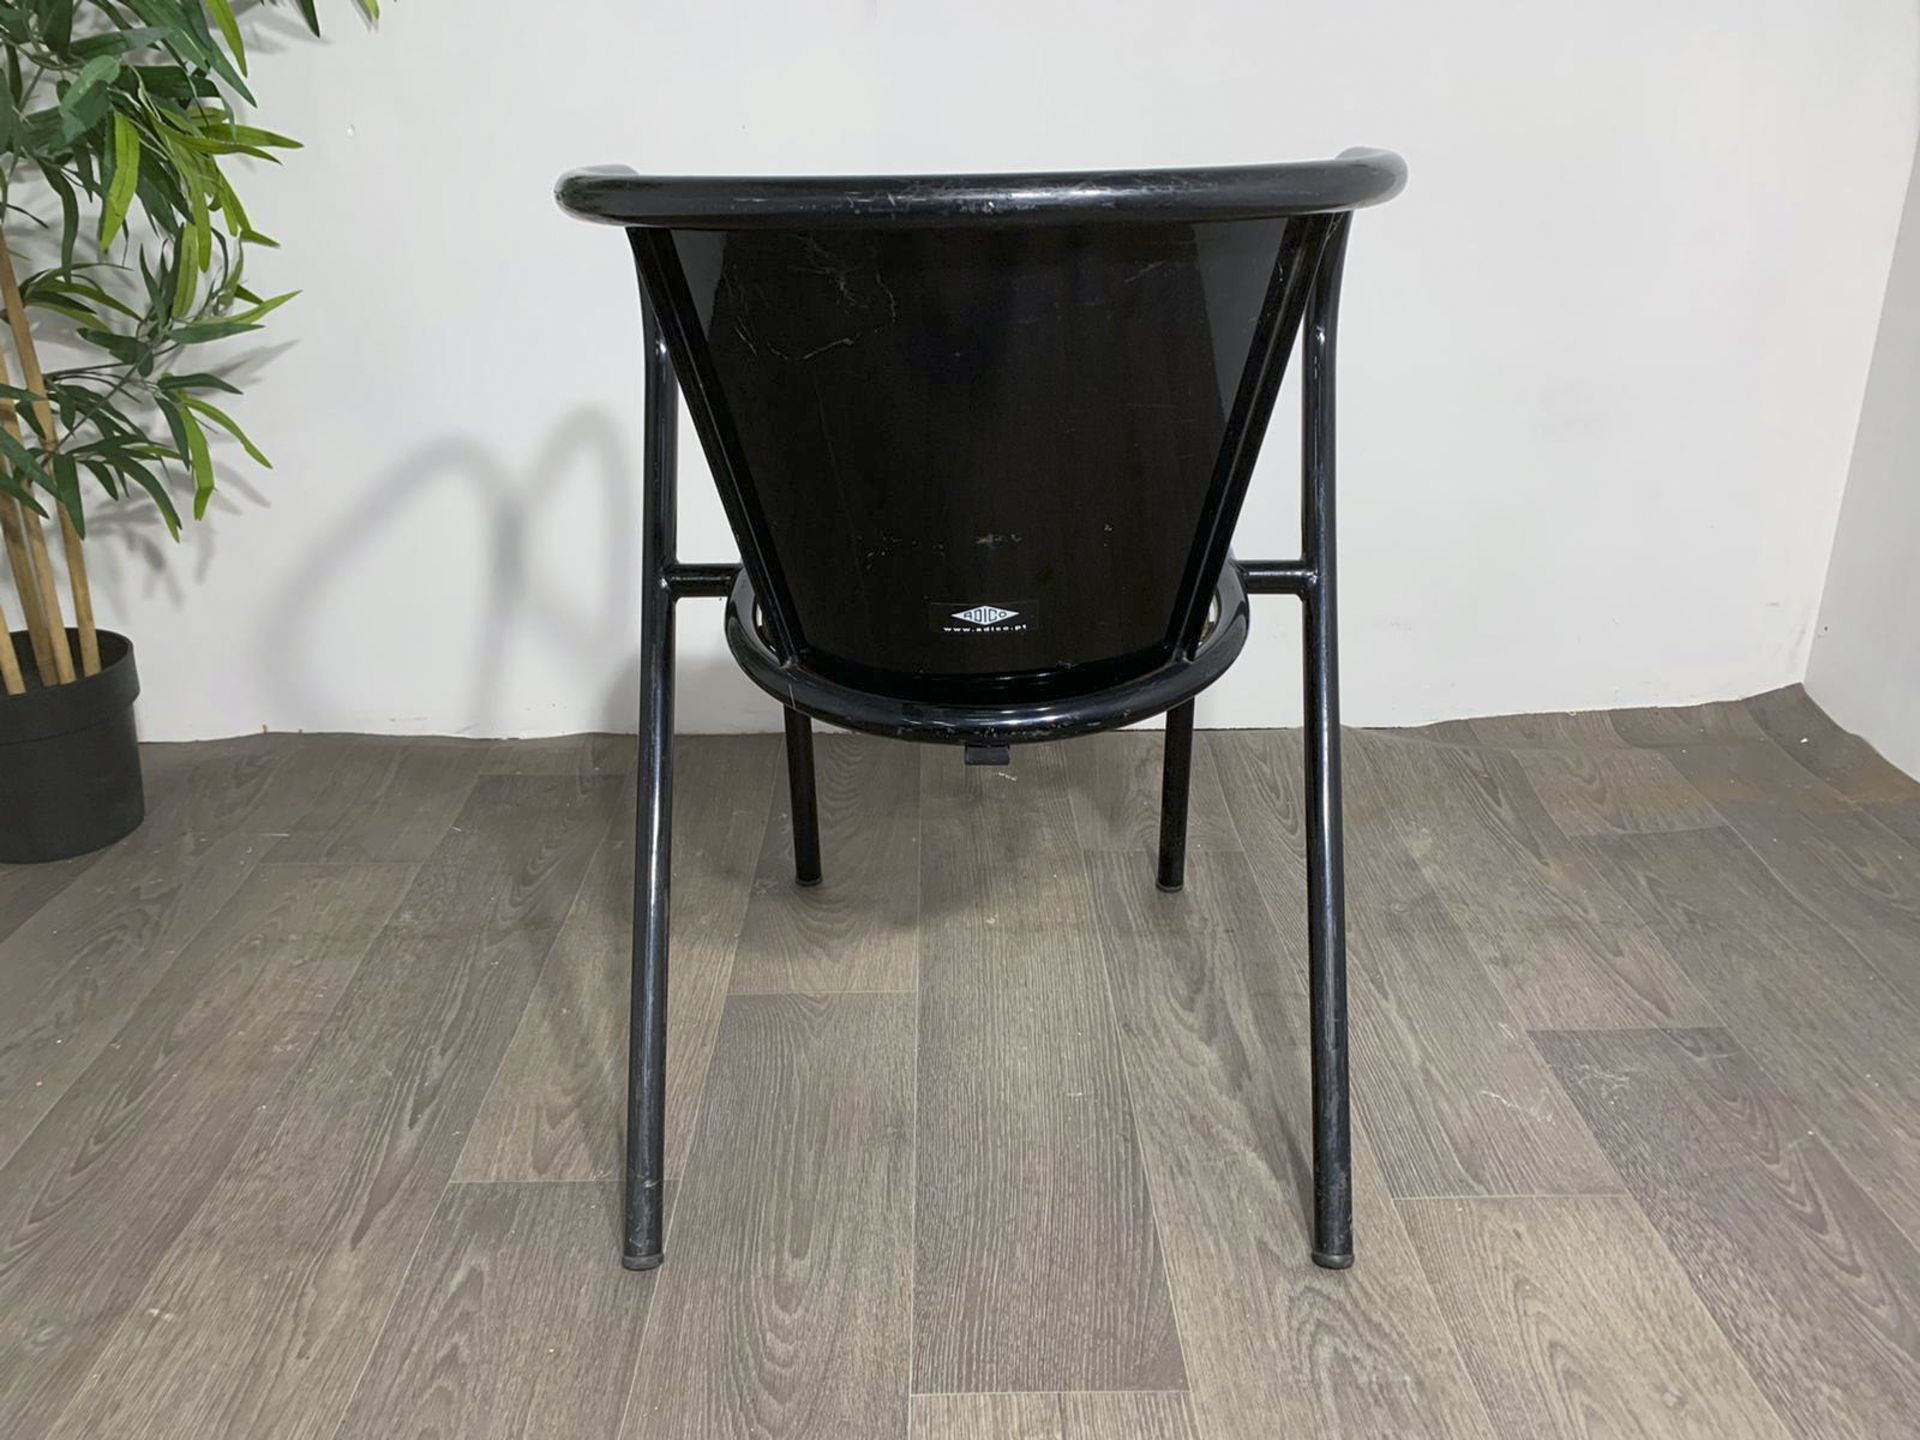 Adico 5008 Black Chair With Wooden Seat - Image 3 of 8